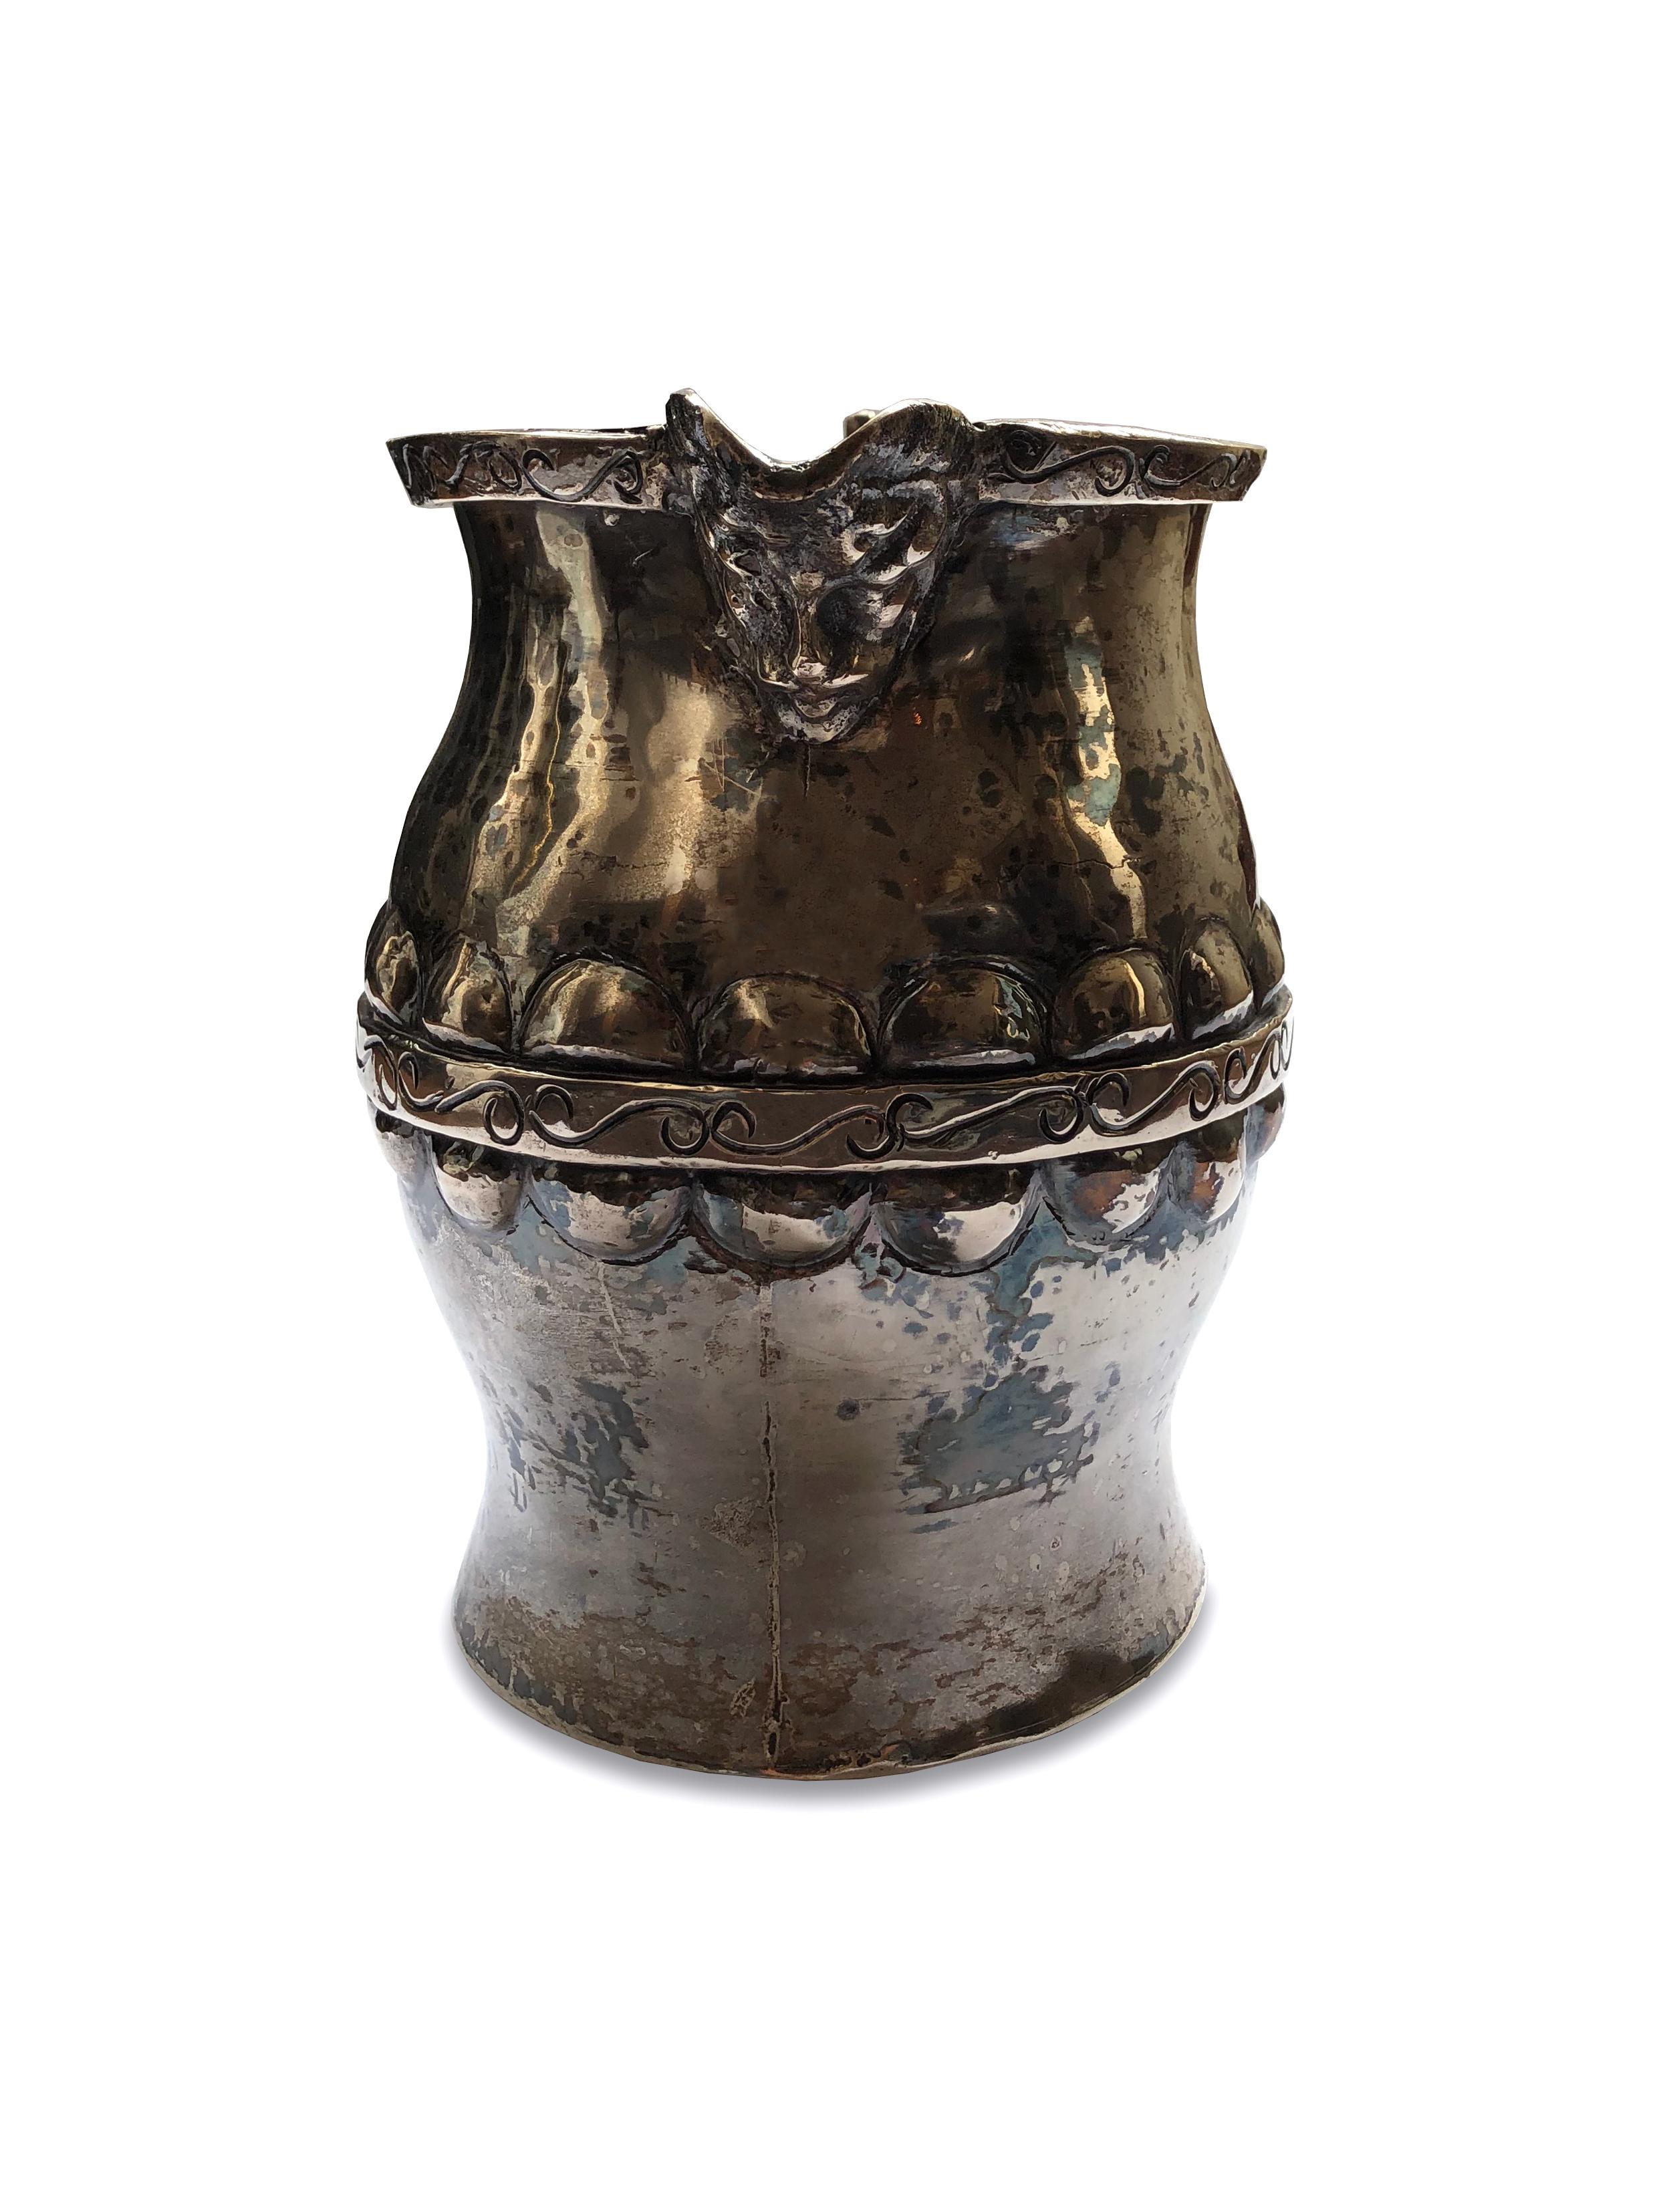 Antique small silver pitcher / creamer. Silver casted piece with metal engraving and a carved face on the mouth serving area. Stampled on the inside. 

Property from esteemed interior designer Juan Montoya. Juan Montoya is one of the most